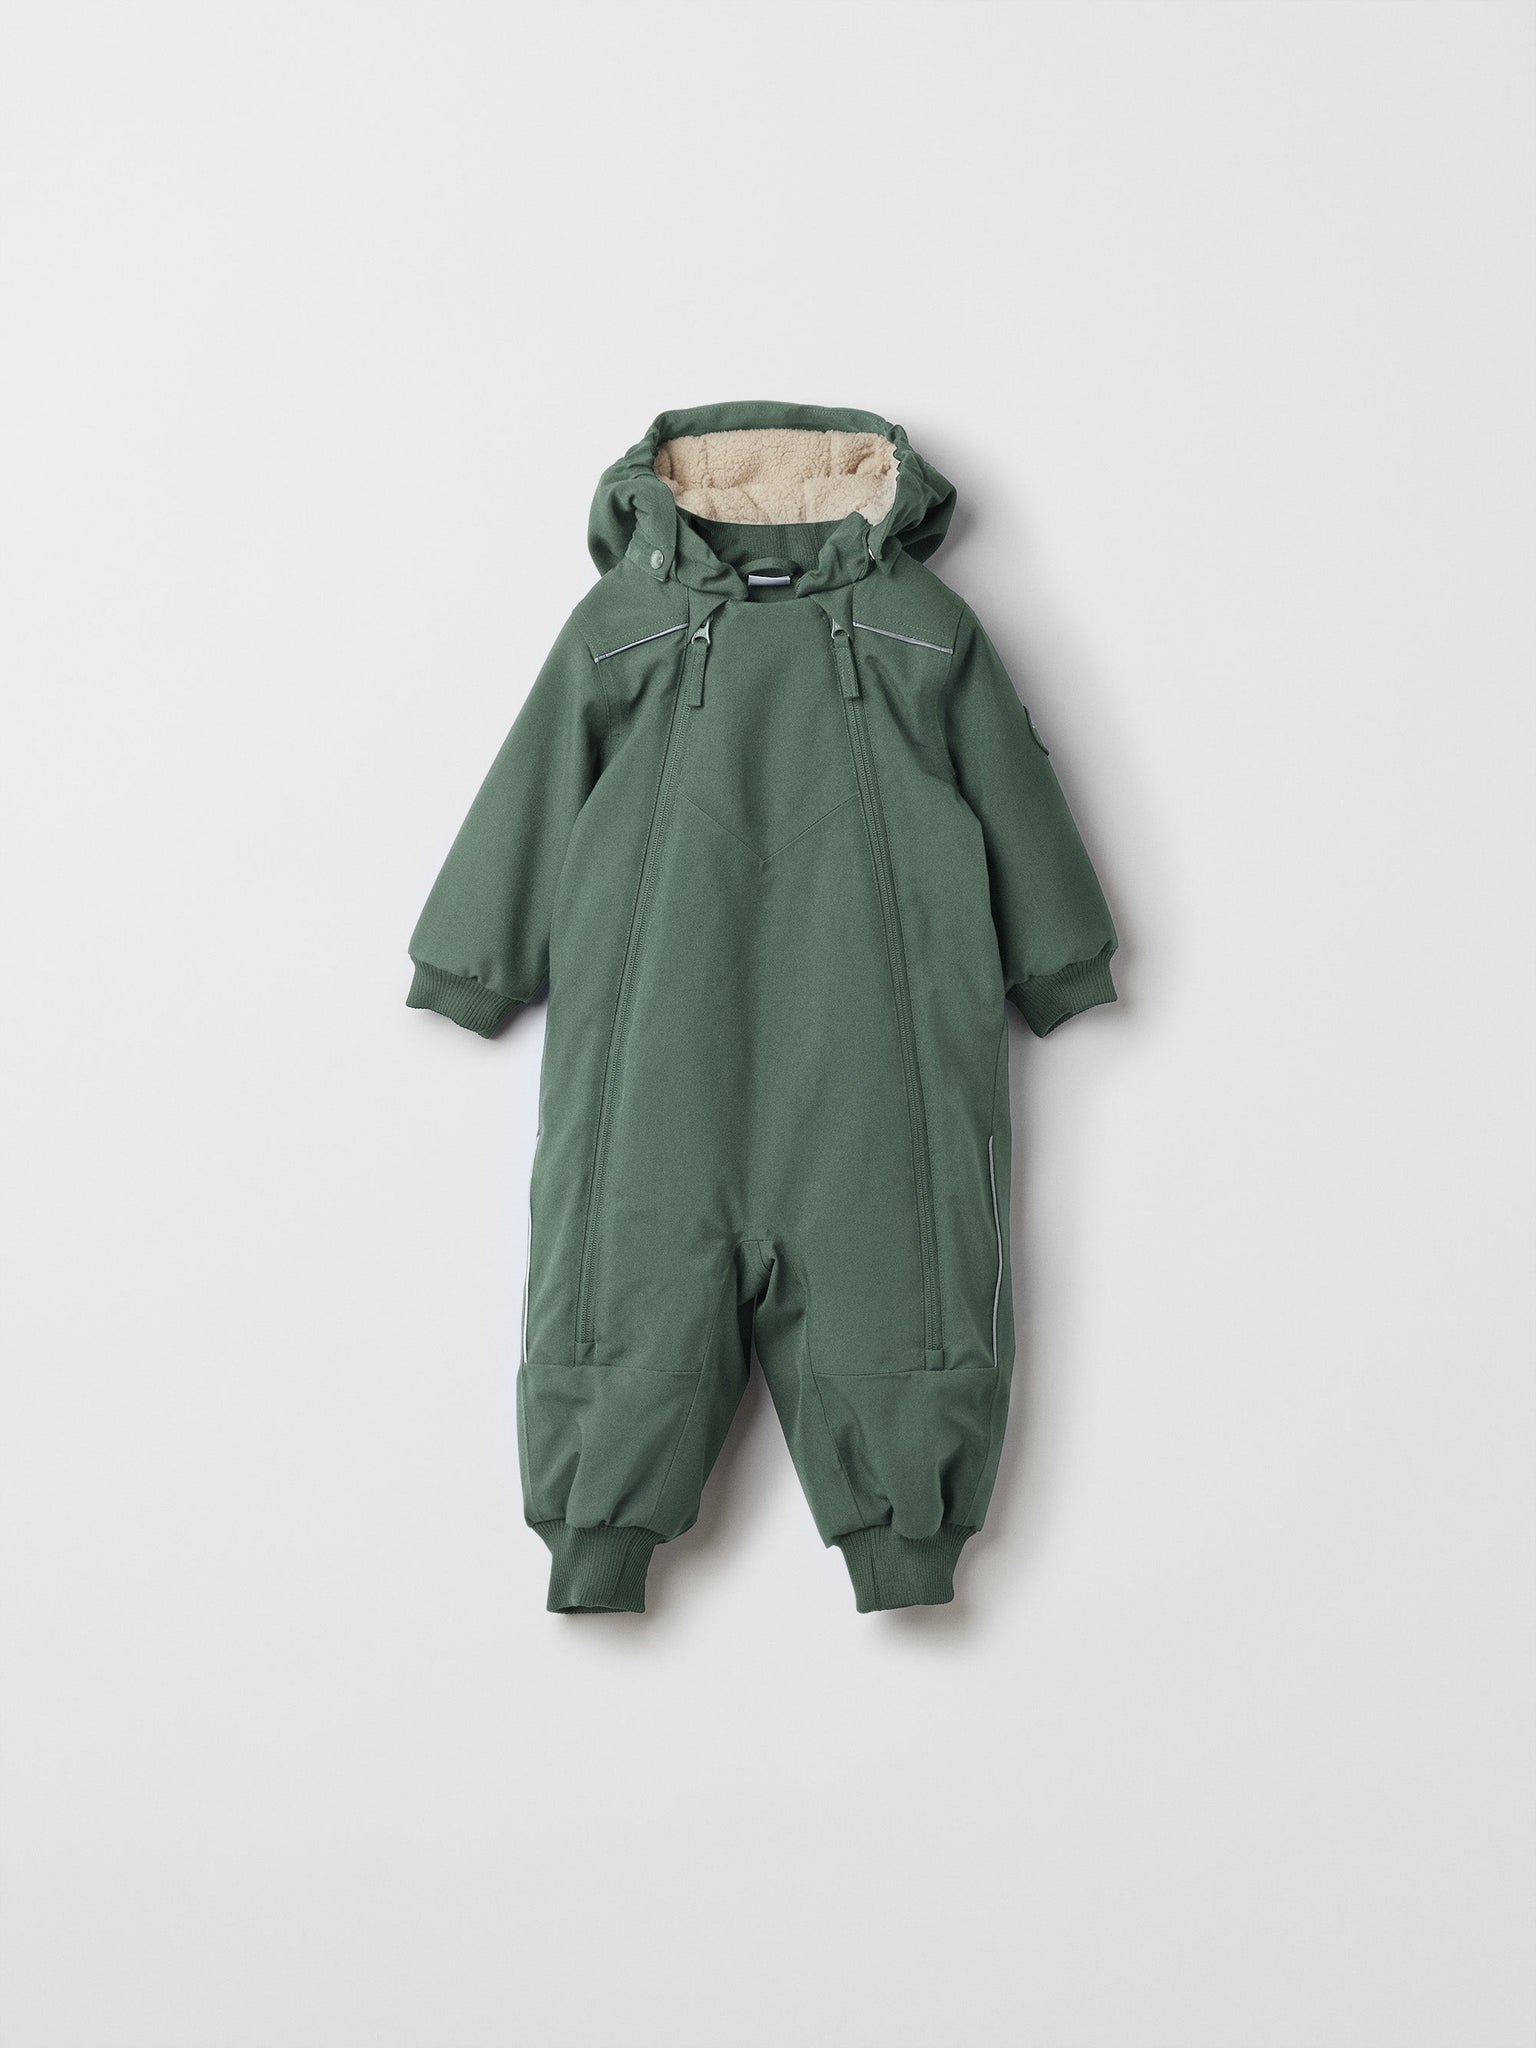 Green Padded Baby Pramsuit from the Polarn O. Pyret outerwear collection. The best ethical kids outerwear.